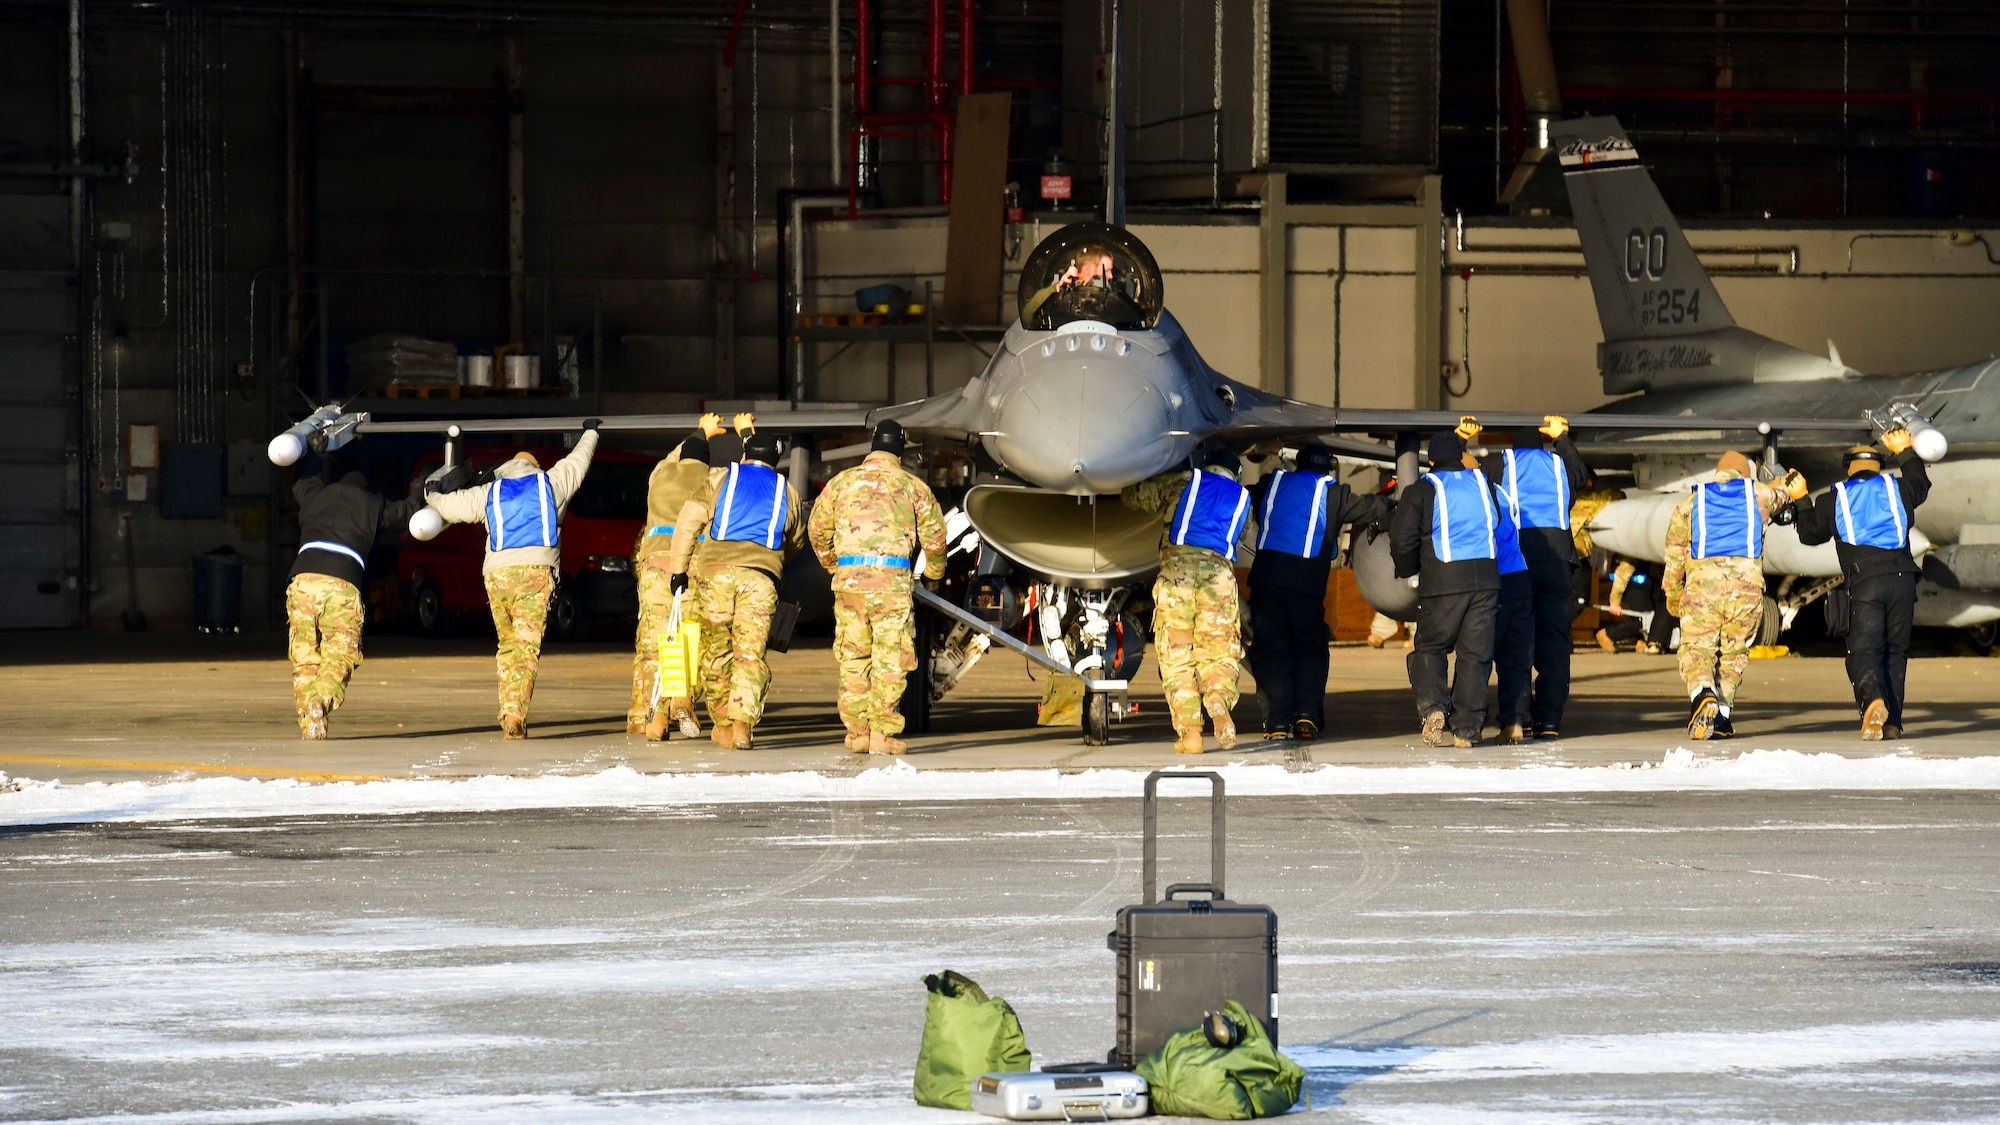 U.S. Air Force Airmen from the 148th Aircraft Maintenance Squadron recover an F-16 at Thule Air Base, Greenland during North American Aerospace Defense Command’s Arctic air defense exercise, Amalgam Dart 21-02, March 22, 2021.